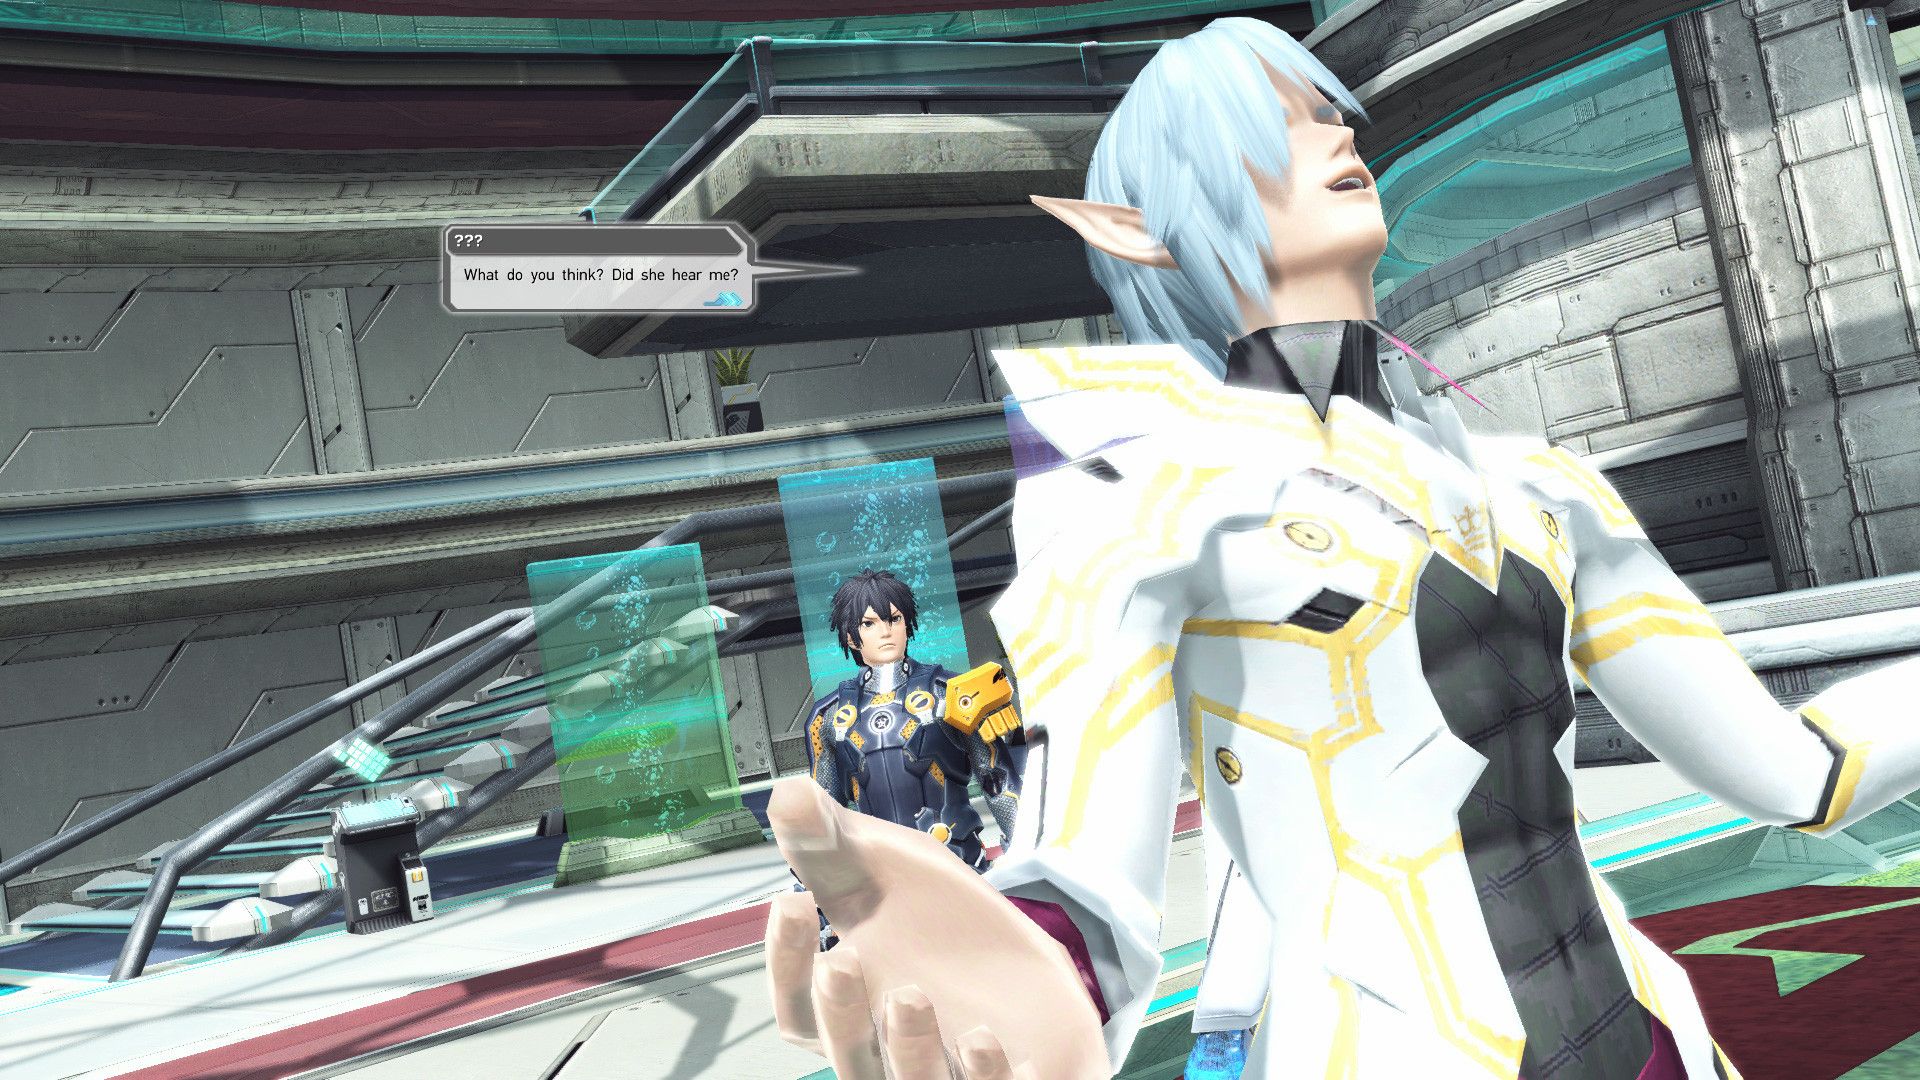 Phantasy Star Online 2 Steam release date is coming with 'New Genesis' content